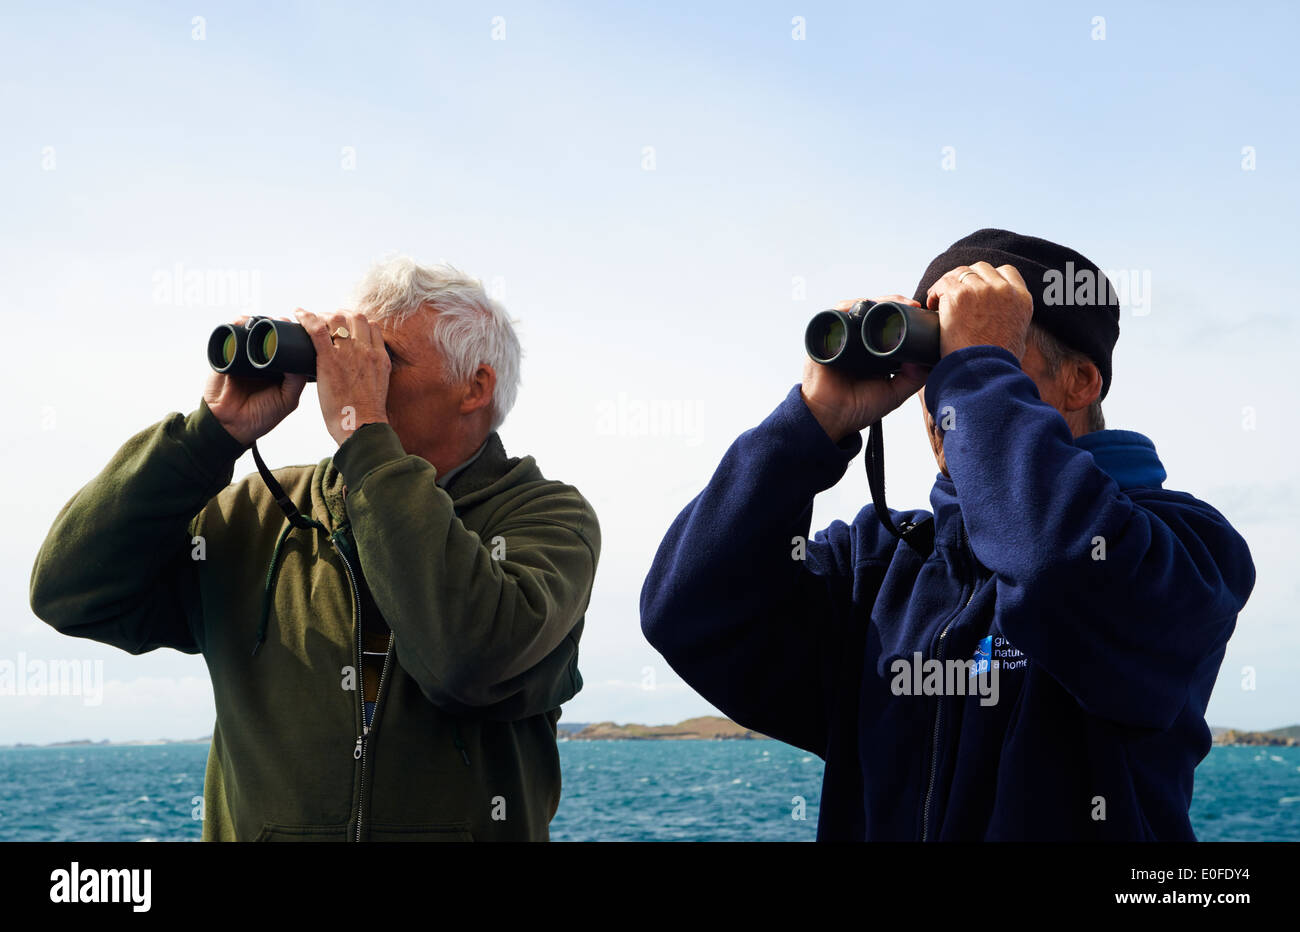 Two men people from RSPB with binoculars watching the birds on the Scillonian III ferry boat trip from Isles of Scilly, Scillies, Cornwall in April Stock Photo